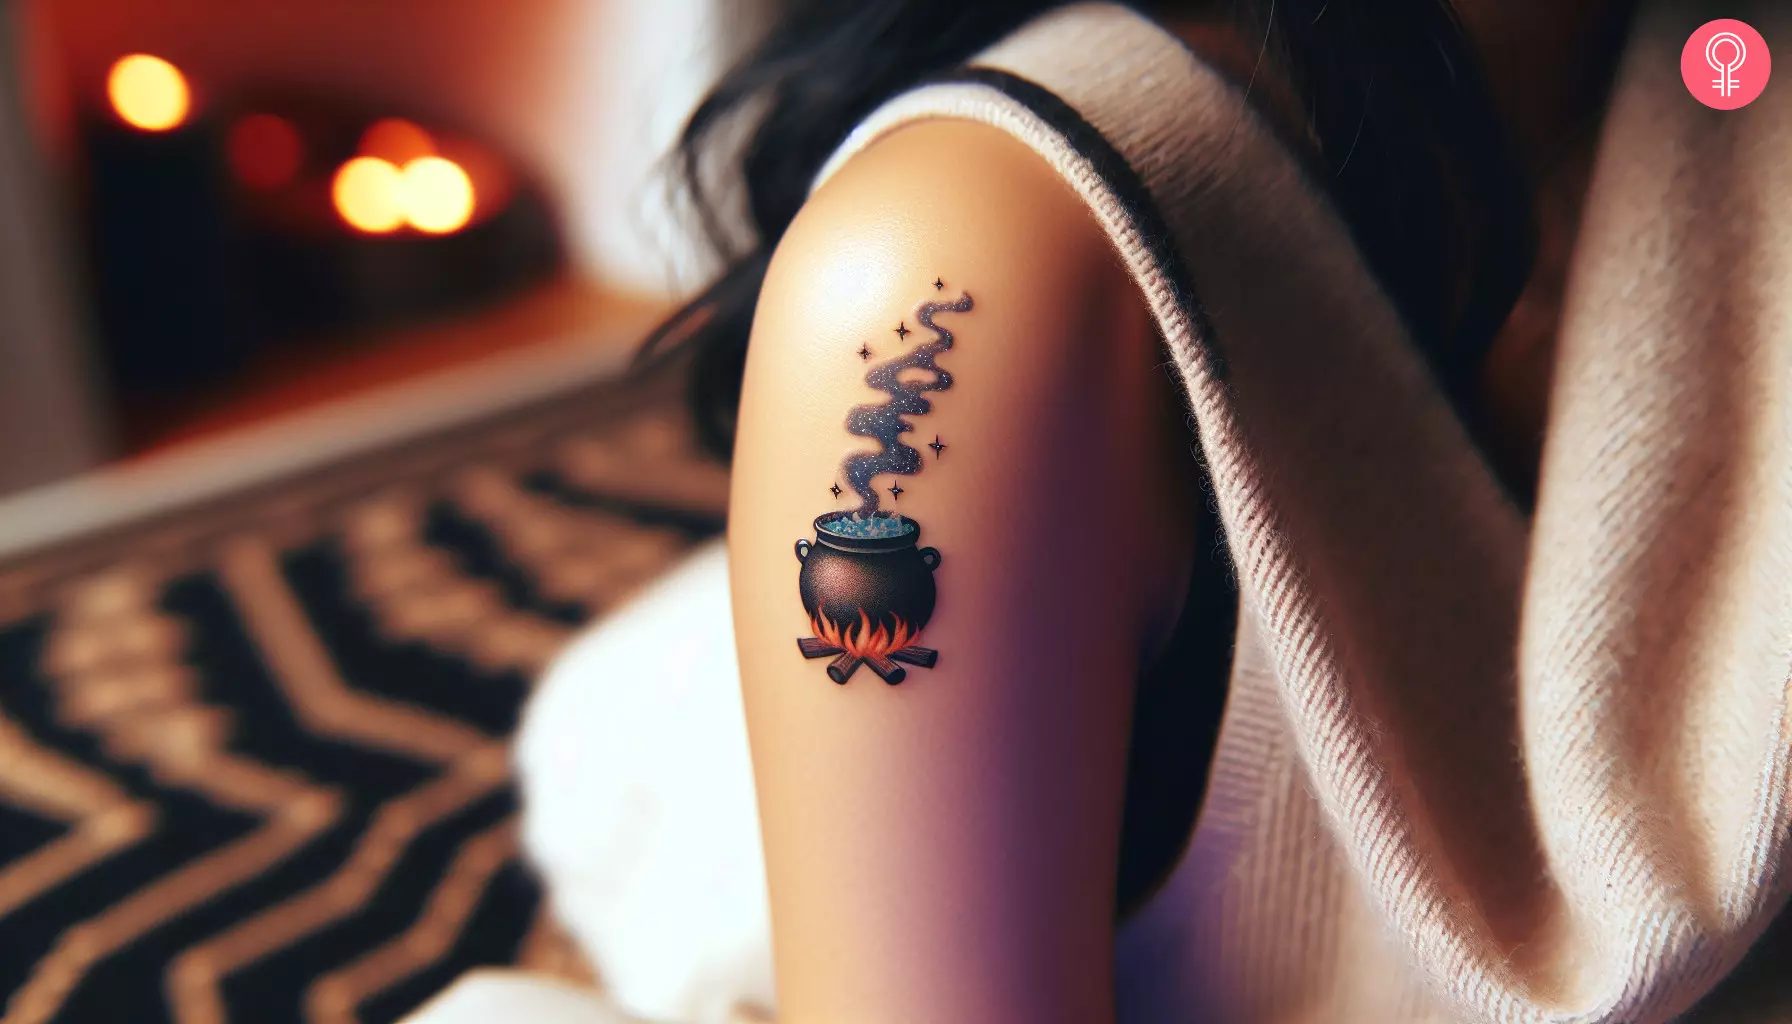 A small witchy tattoo on the forearm